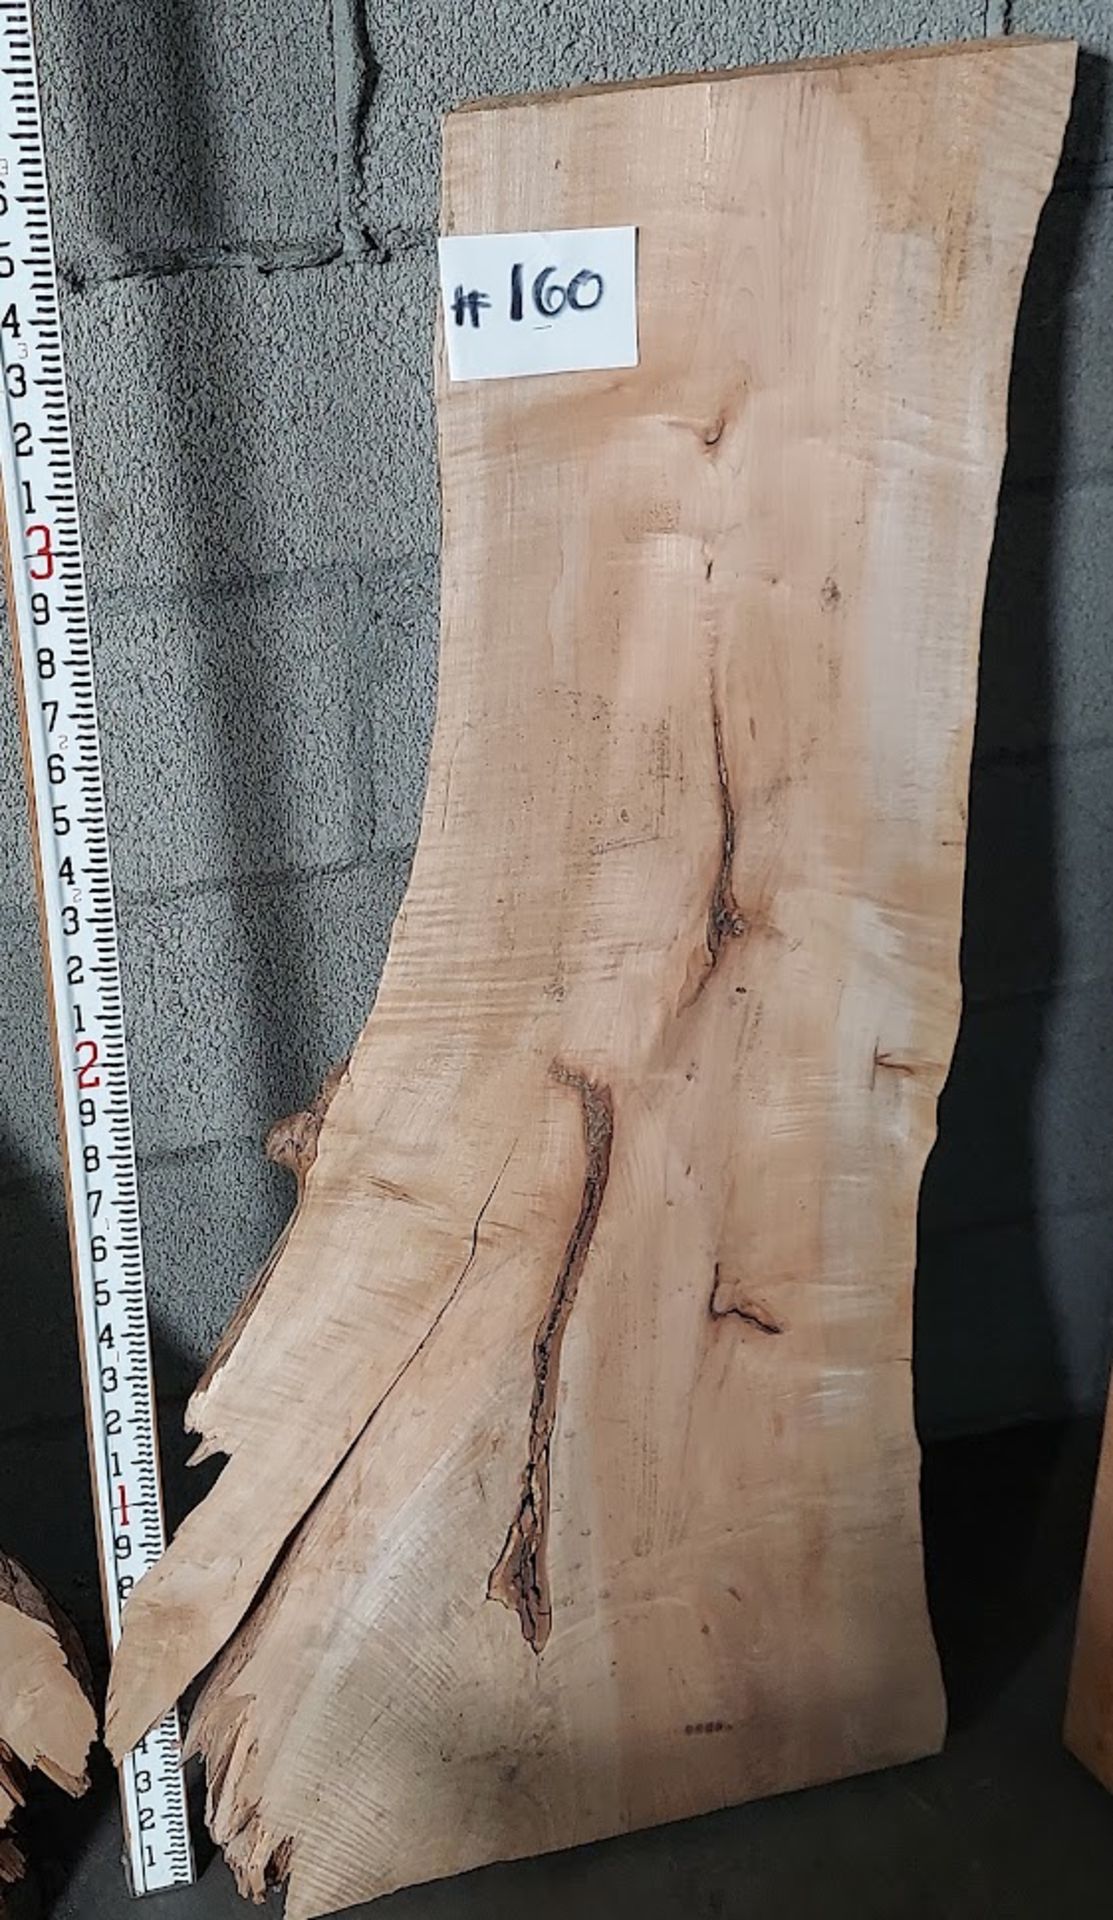 Maple Hardwood Lumber Slab, Size is approx. 44" x 15" - 22" x 2-3/4" Thick, Curly (Book Matched